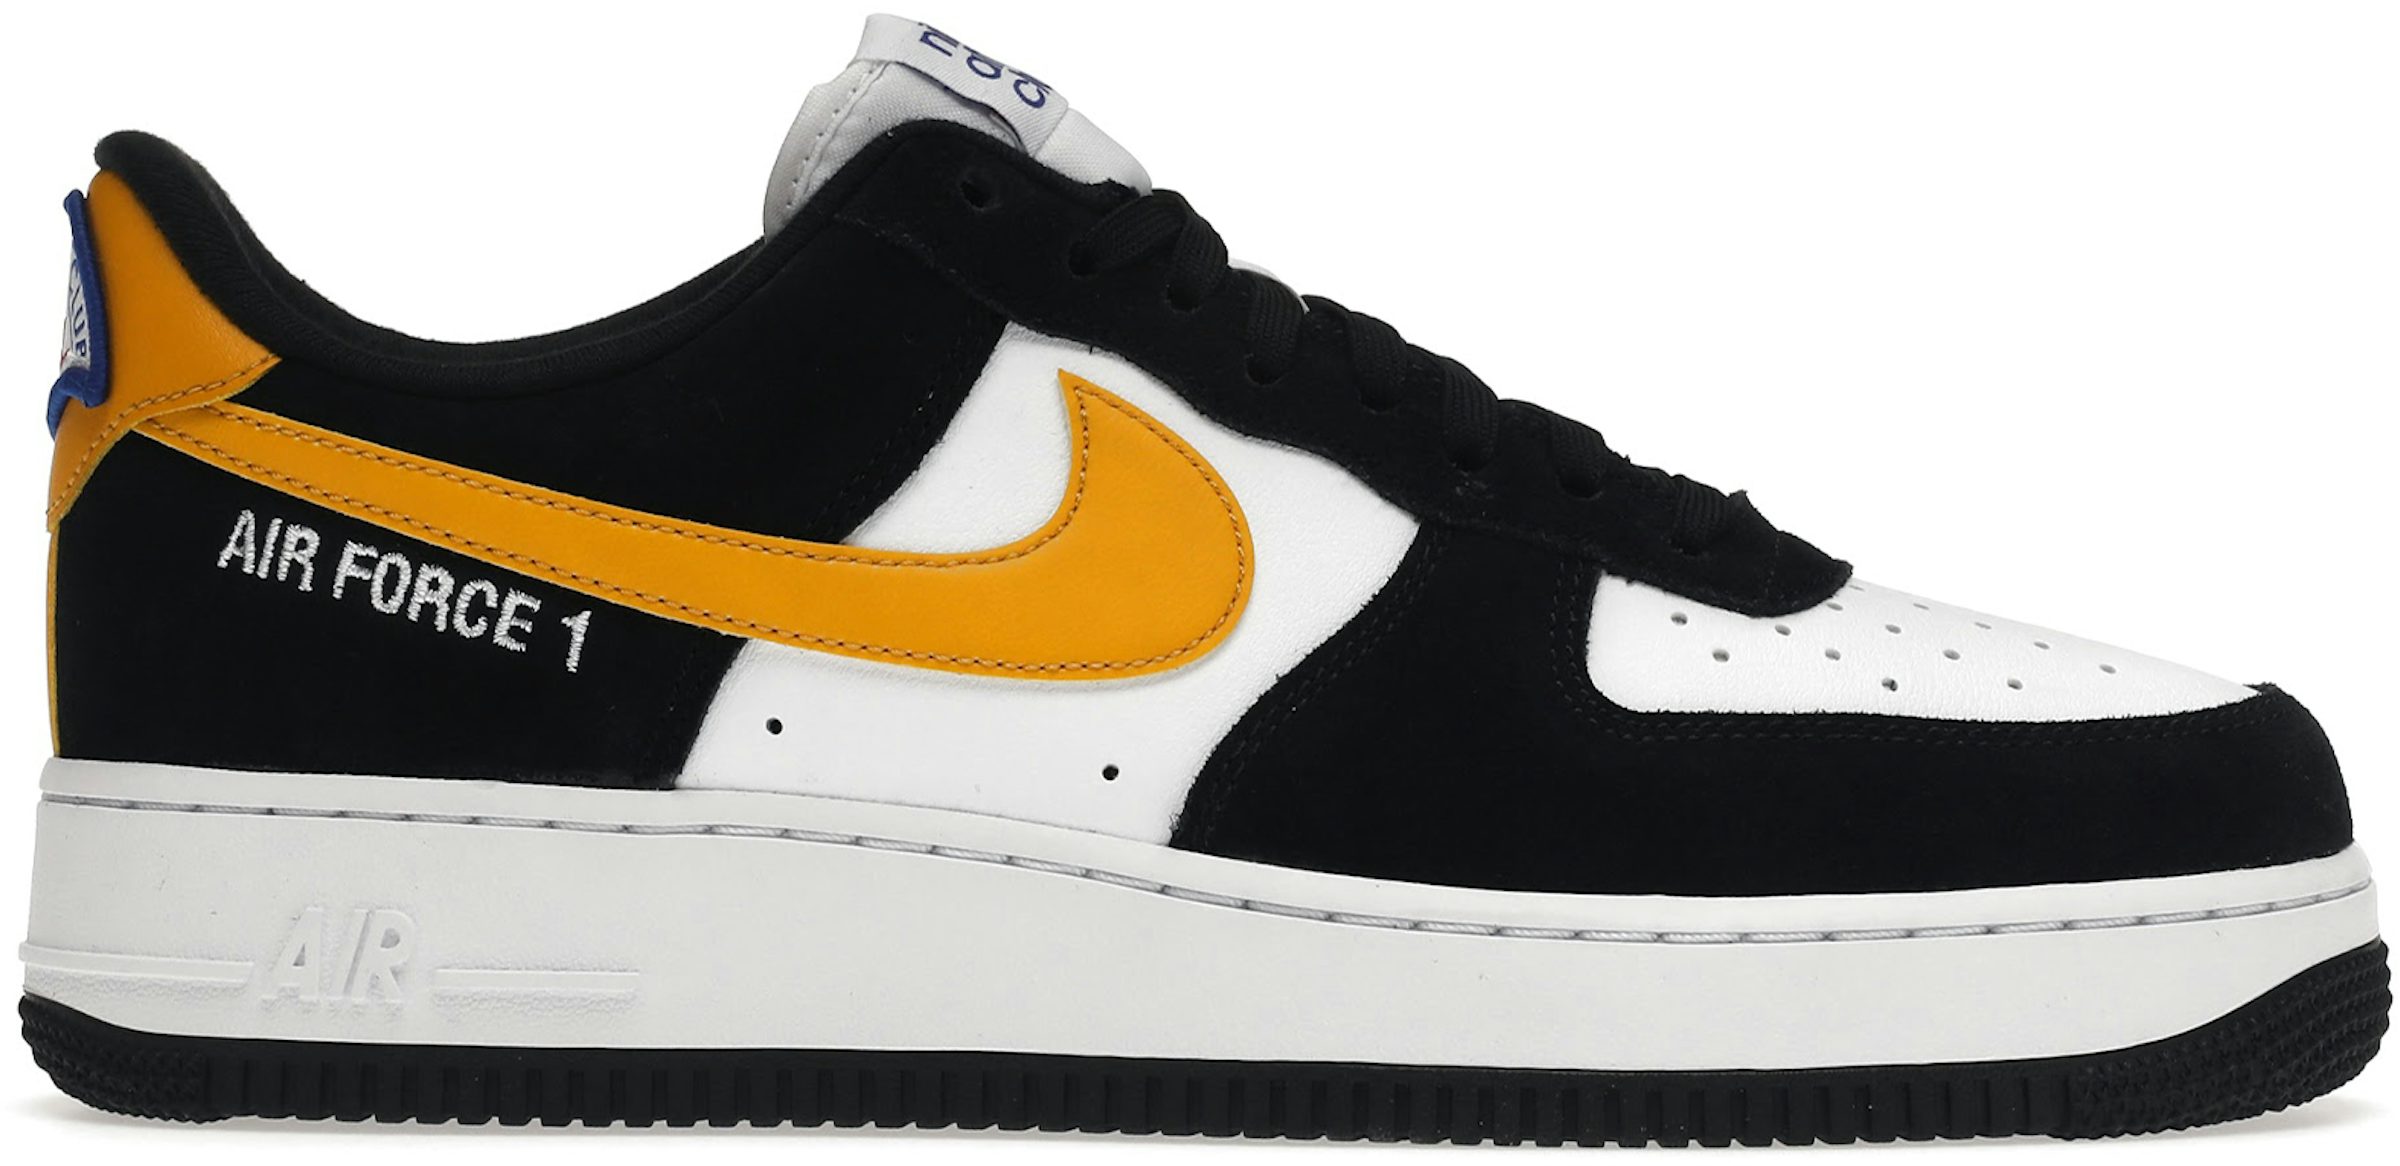 Official Images: Nike Air Force 1 Low Black/White - Sneaker Freaker